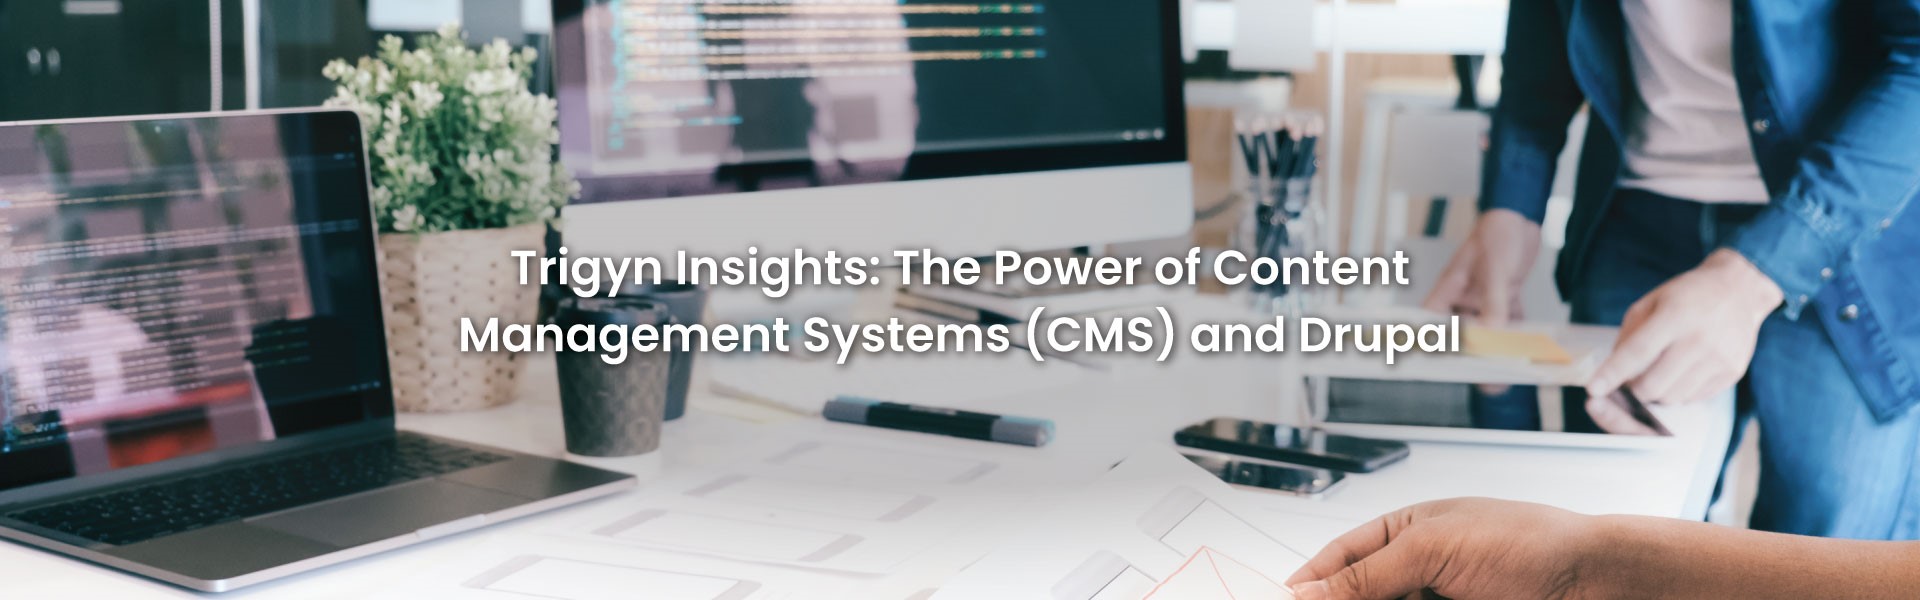  Content Management Systems